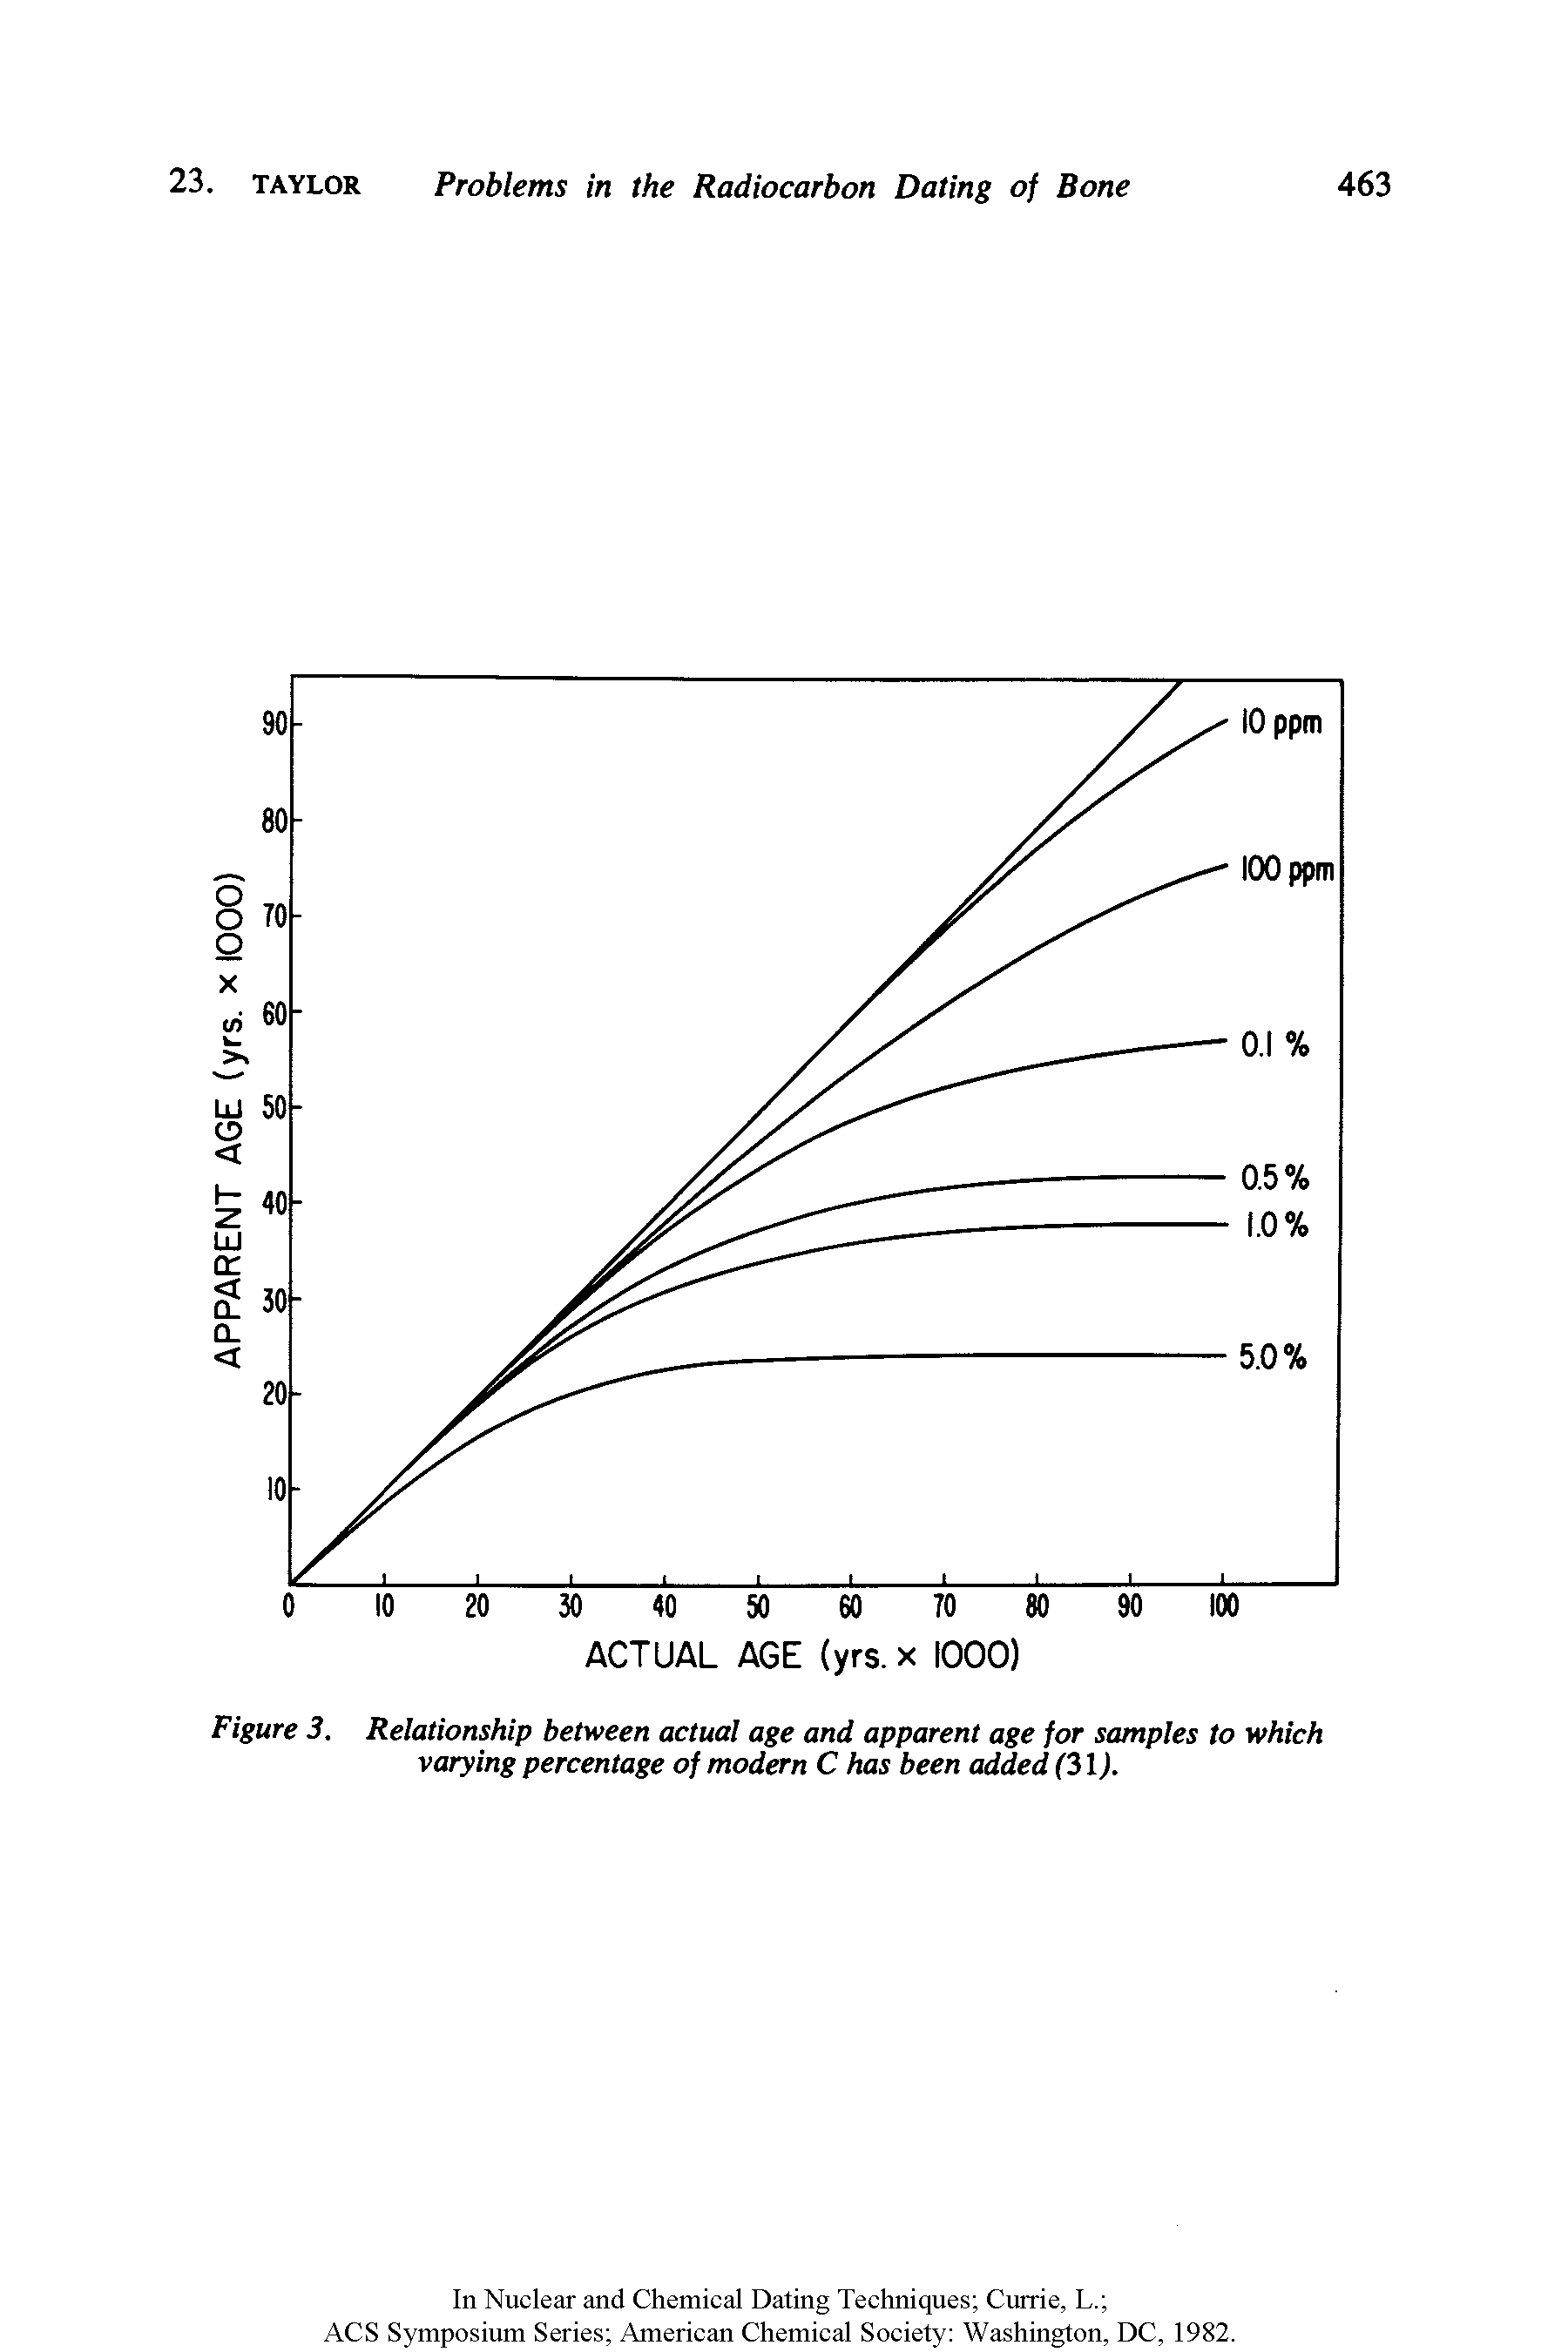 Figure 3. Relationship between actual age and apparent age for samples to which varying percentage of modern C has been added (31).